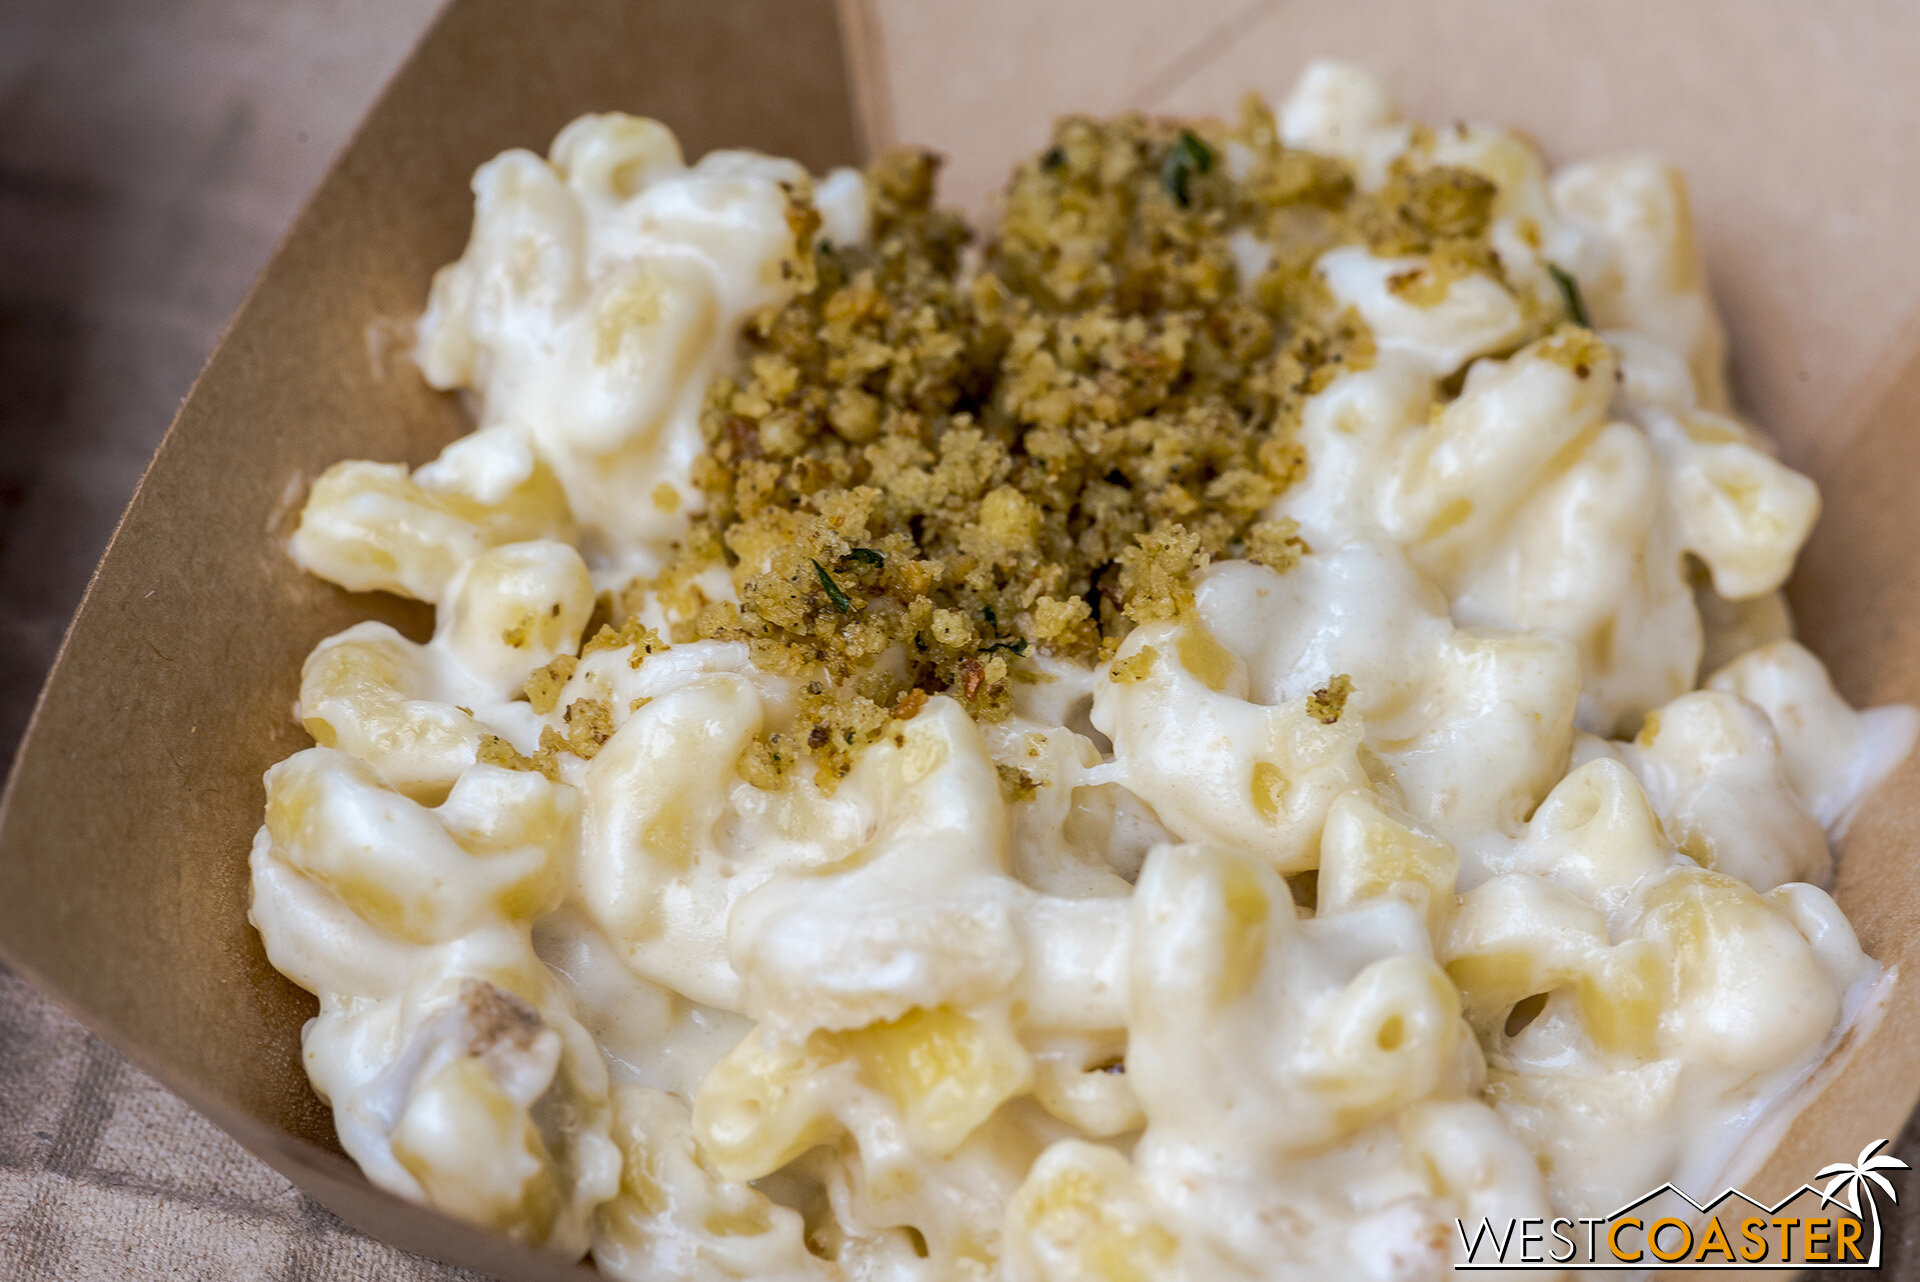  Favorite Things Marketplace: Holiday Stuffing Mac &amp; Cheese  I’ll be honest.  Most of the mac ‘n’ cheese dishes at the DCA food festivals have been more misses than hits.  I didn’t try this item this year, but it was a middle of the road dish las